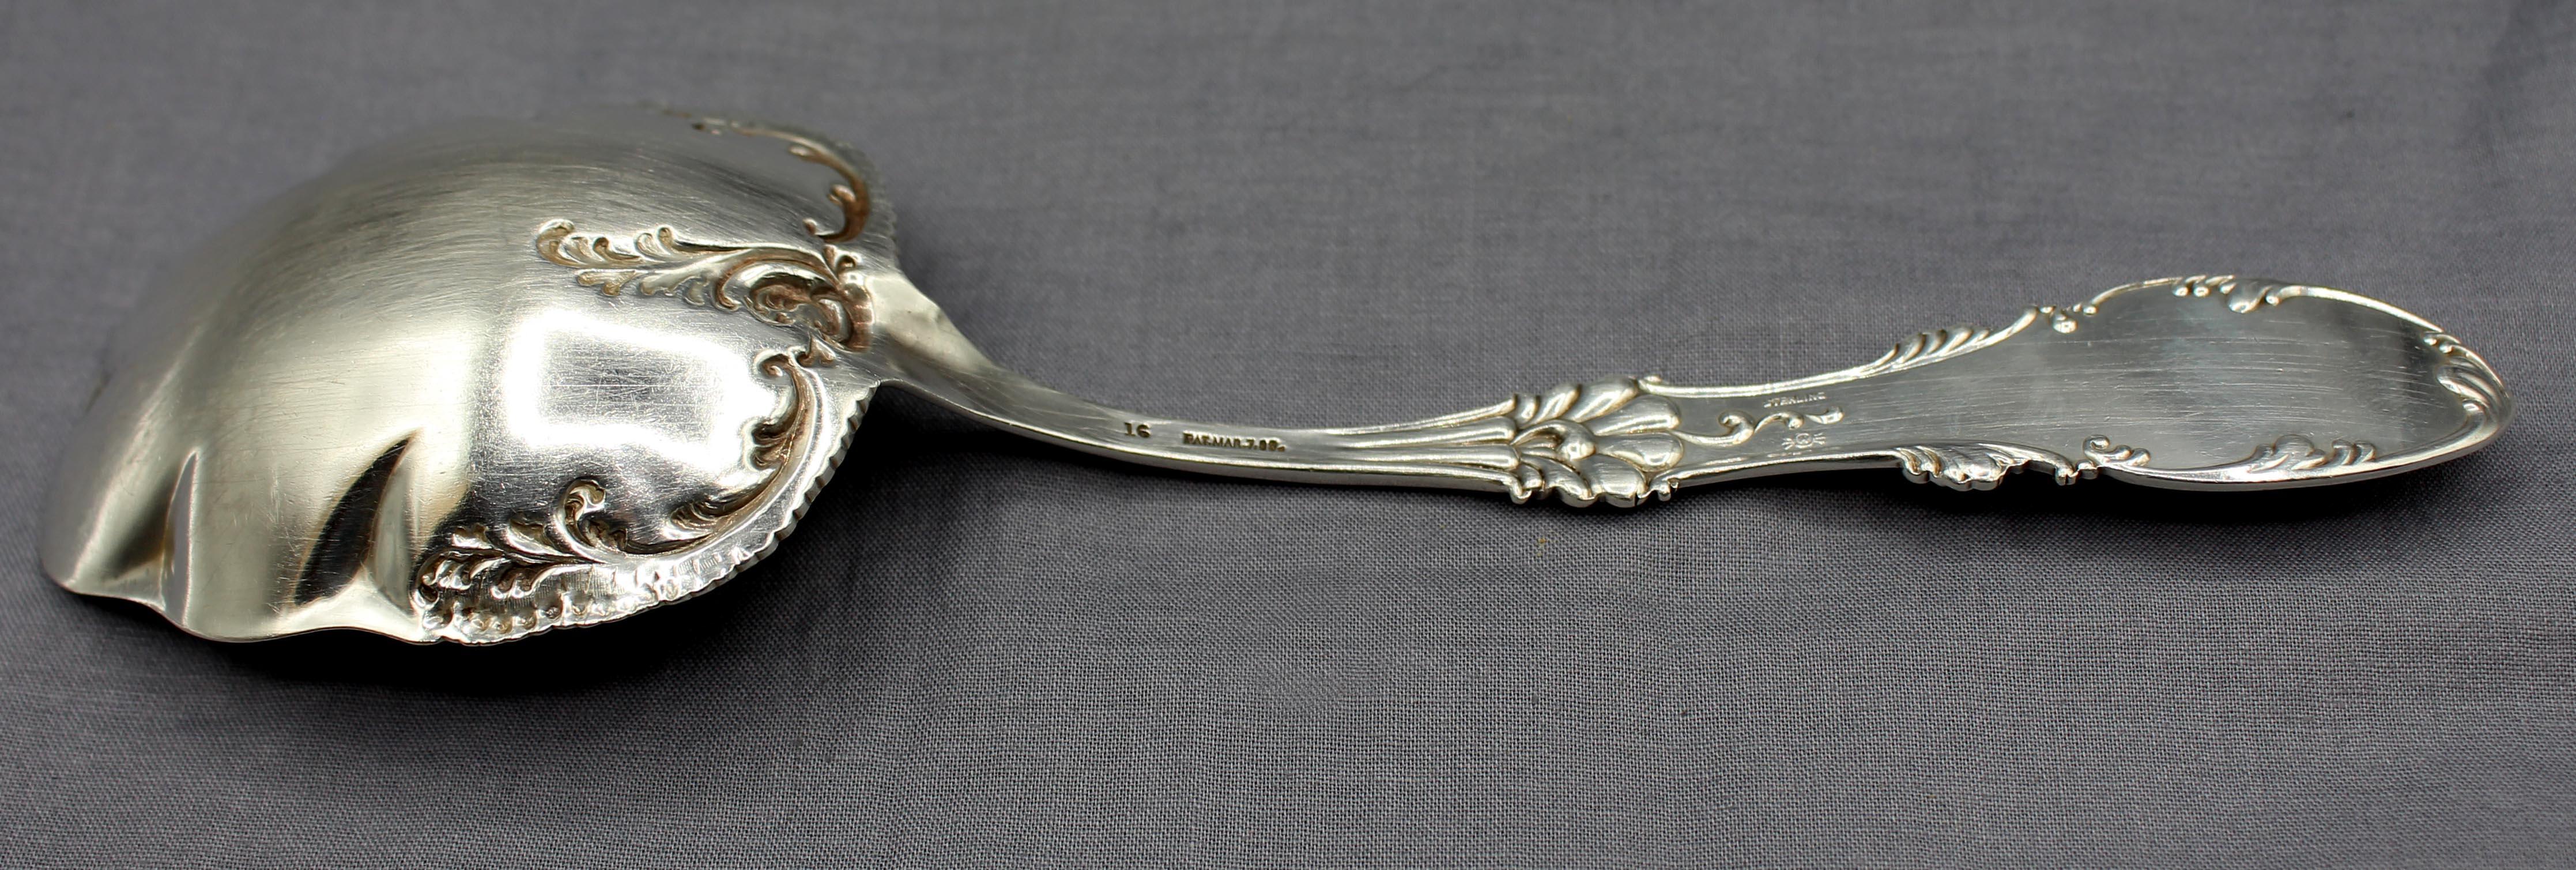 Victorian 1893 Sterling Silver Berry Spoon by Frank Whiting